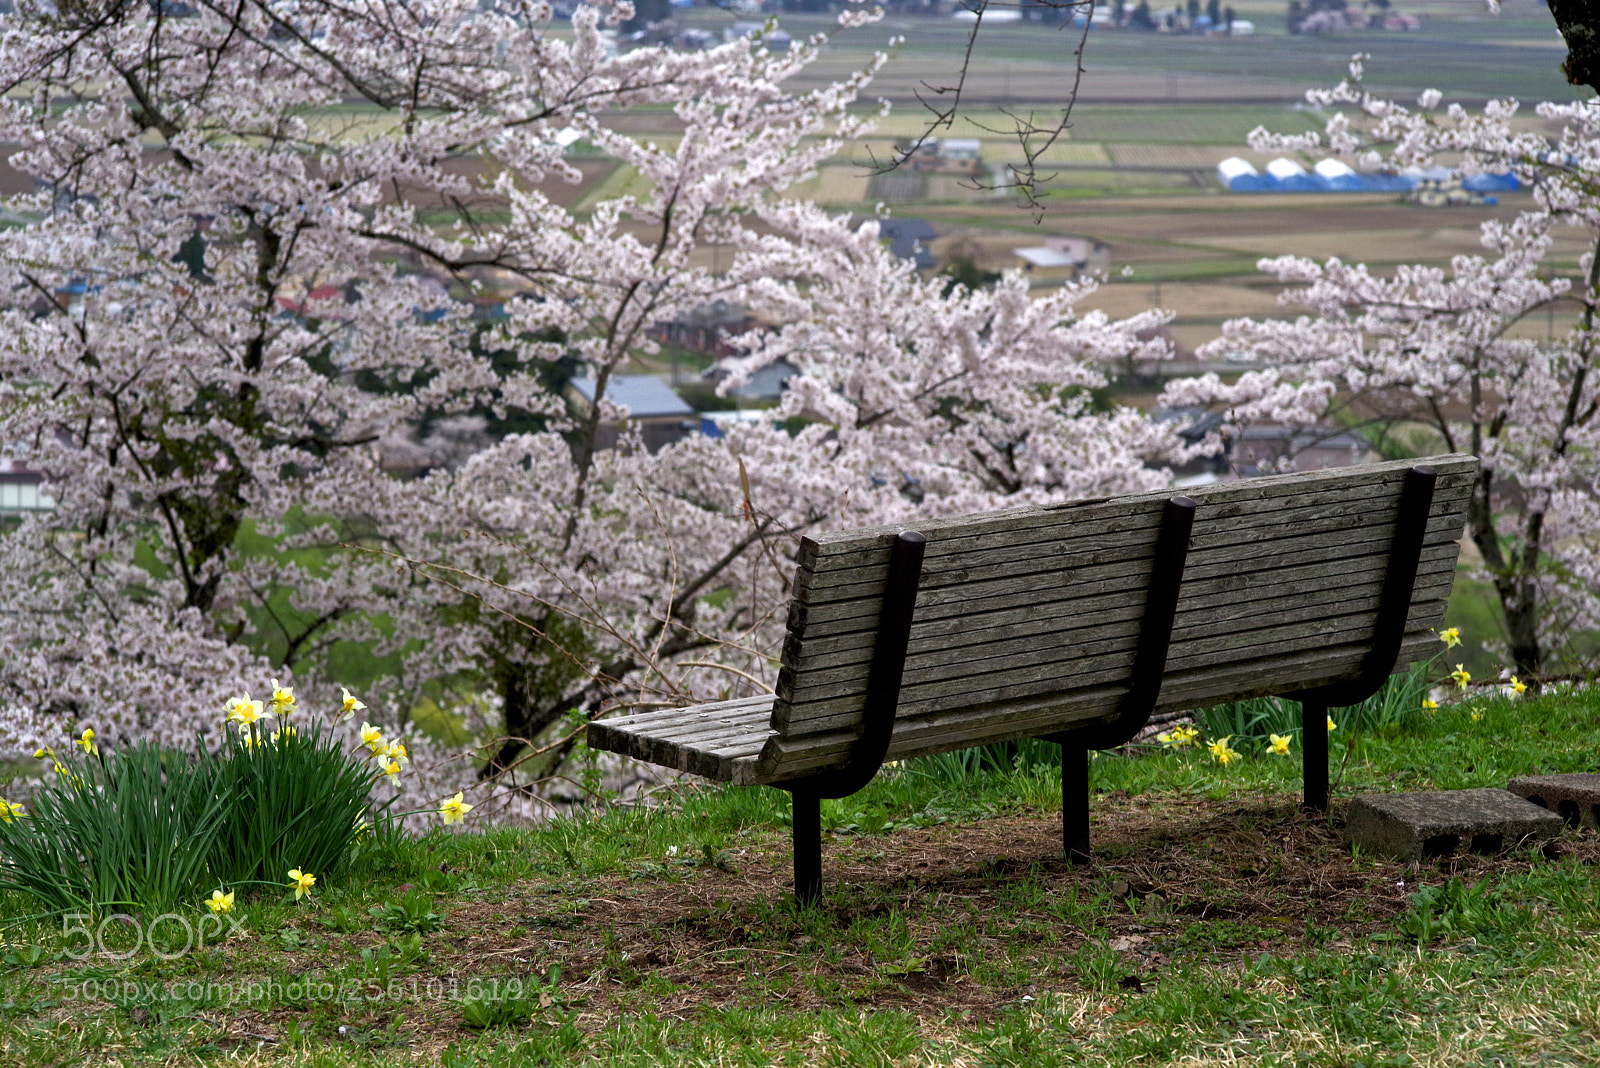 Pentax K-1 sample photo. The bench in the photography